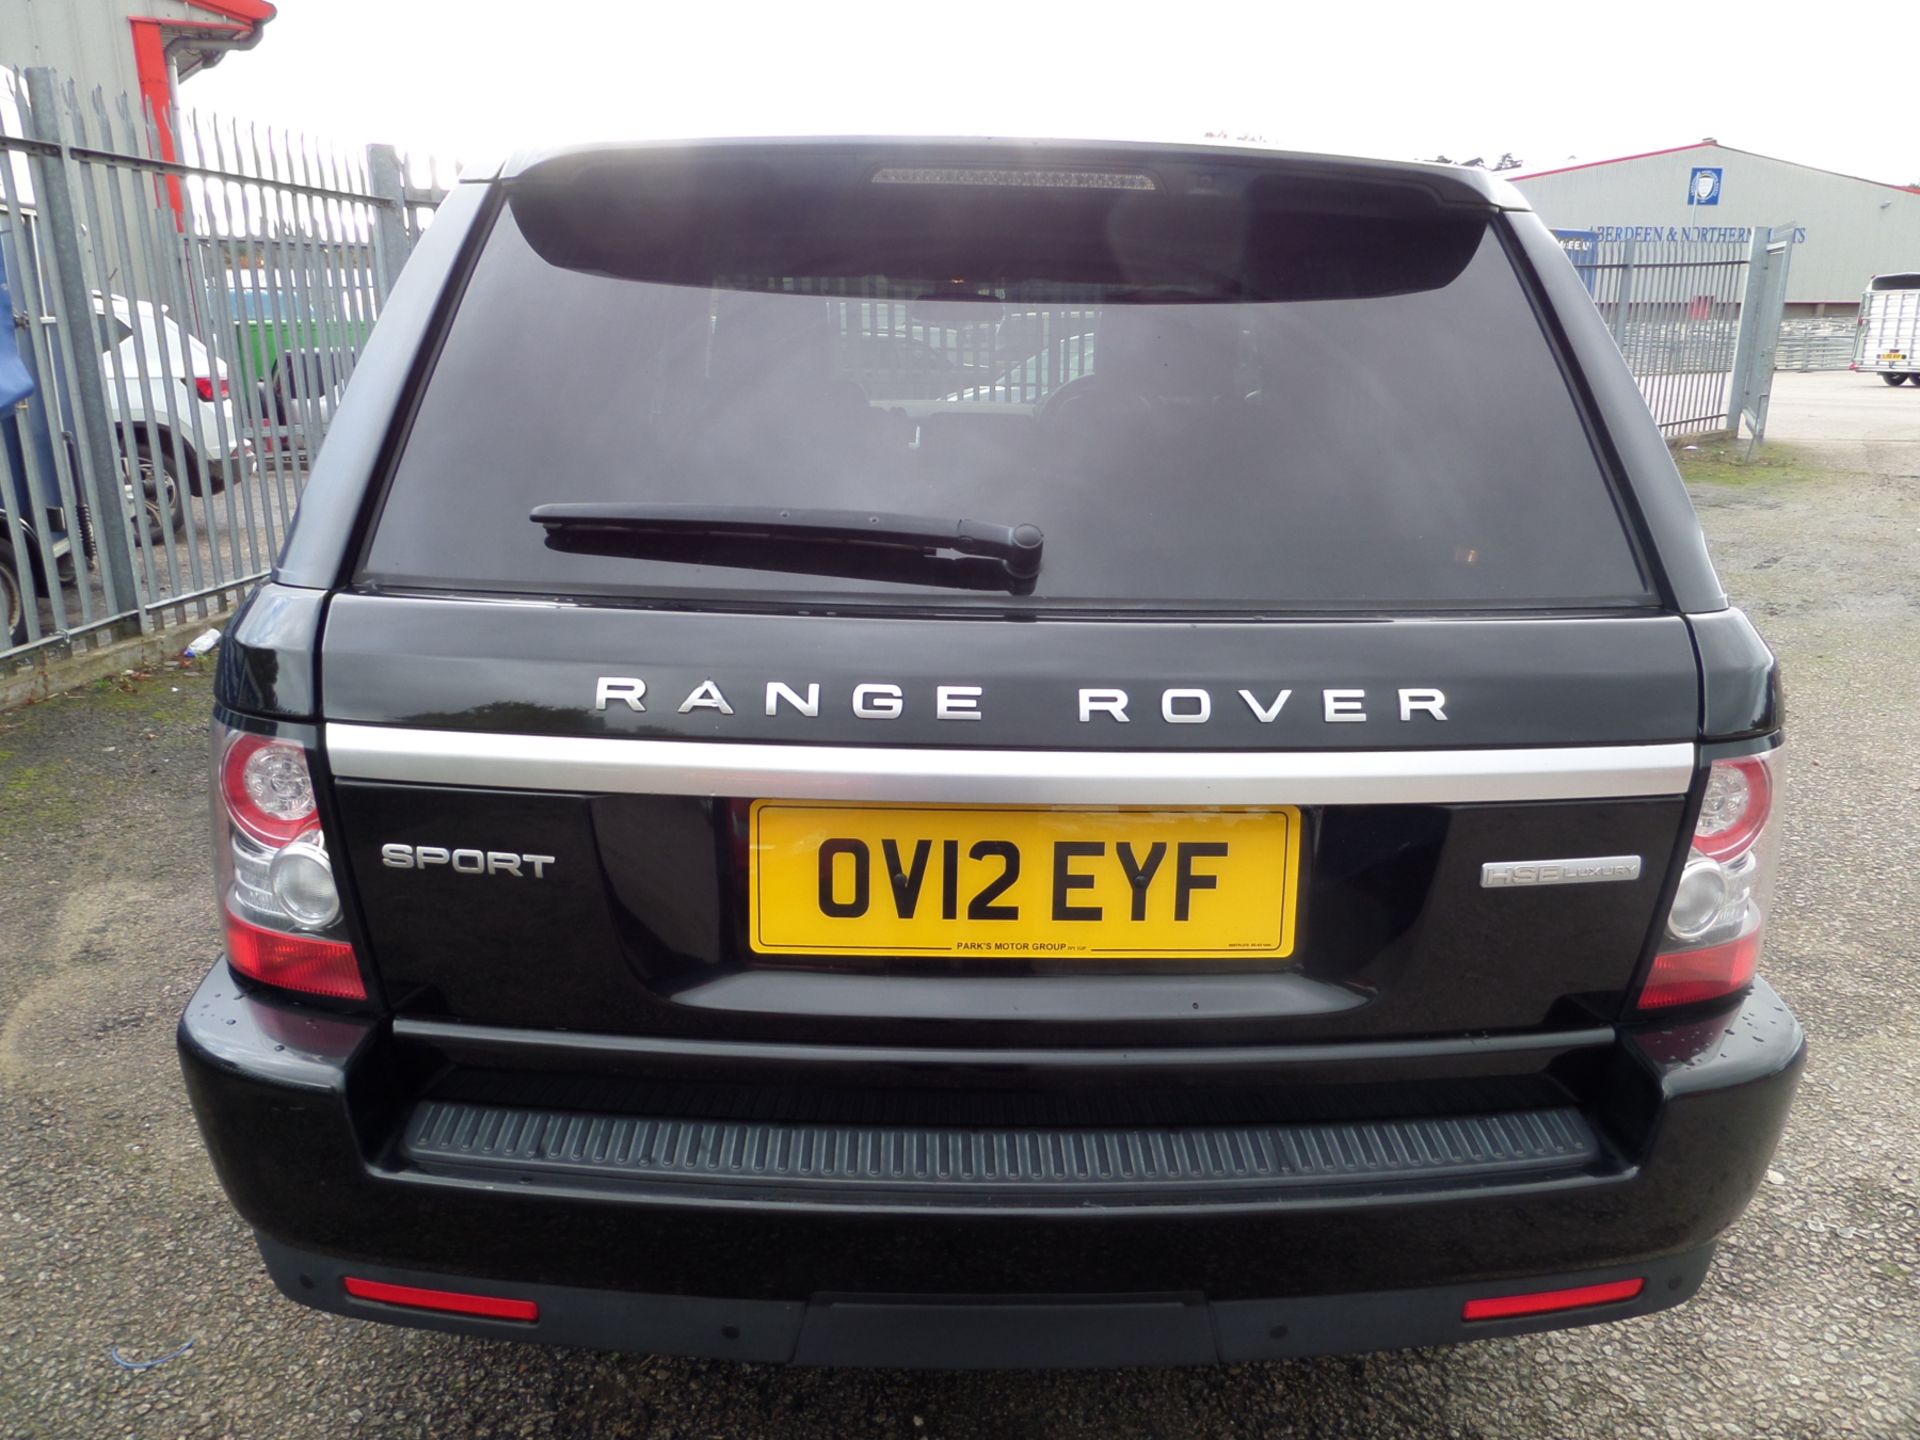 Land Rover R-rover Sport Hse Luxury - 2993cc Estate - Image 4 of 8